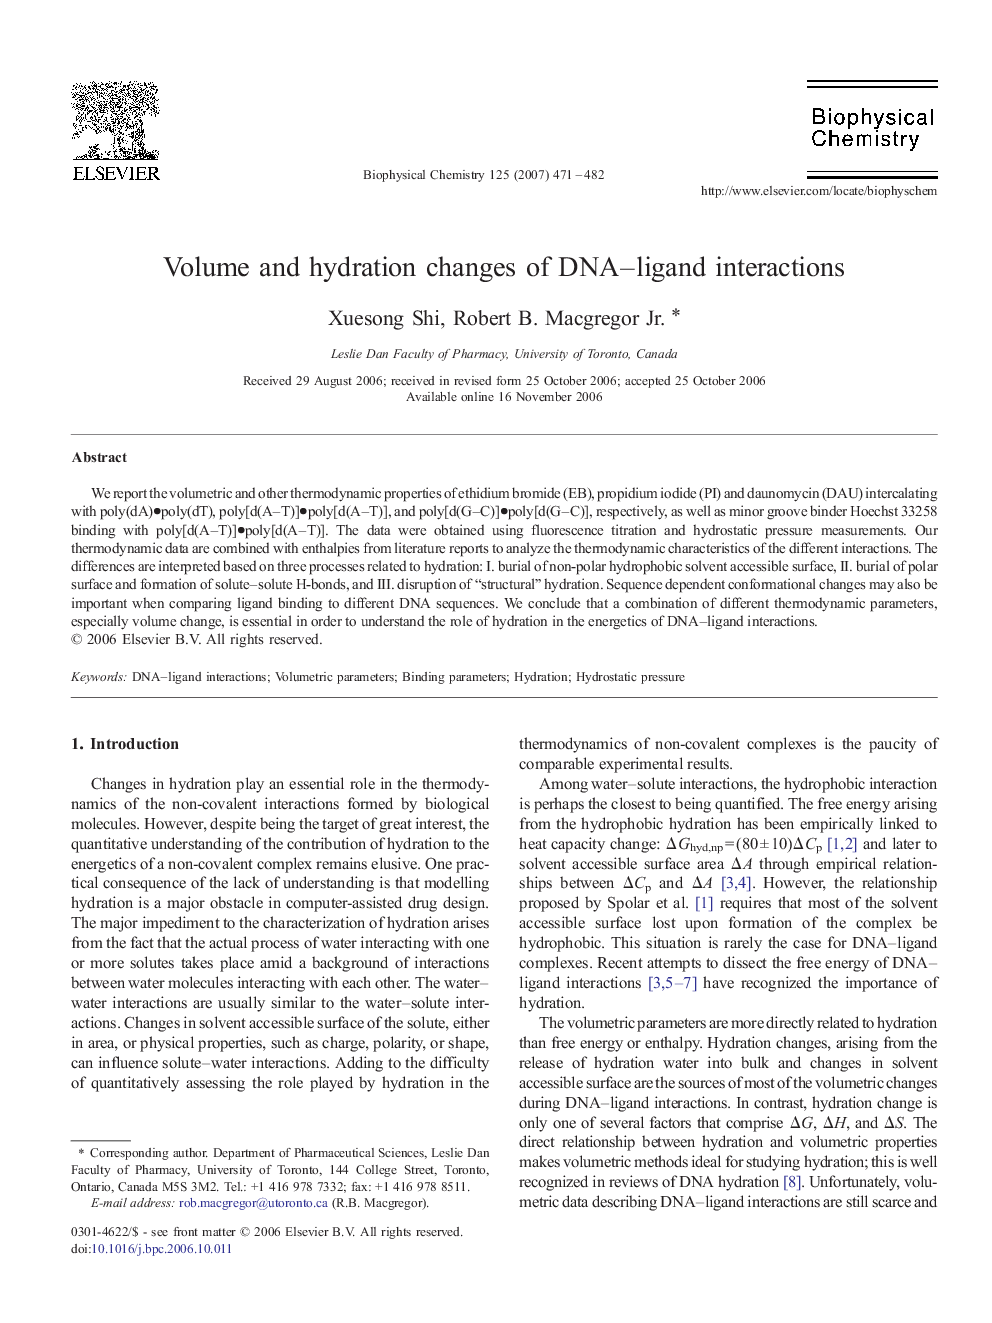 Volume and hydration changes of DNA-ligand interactions